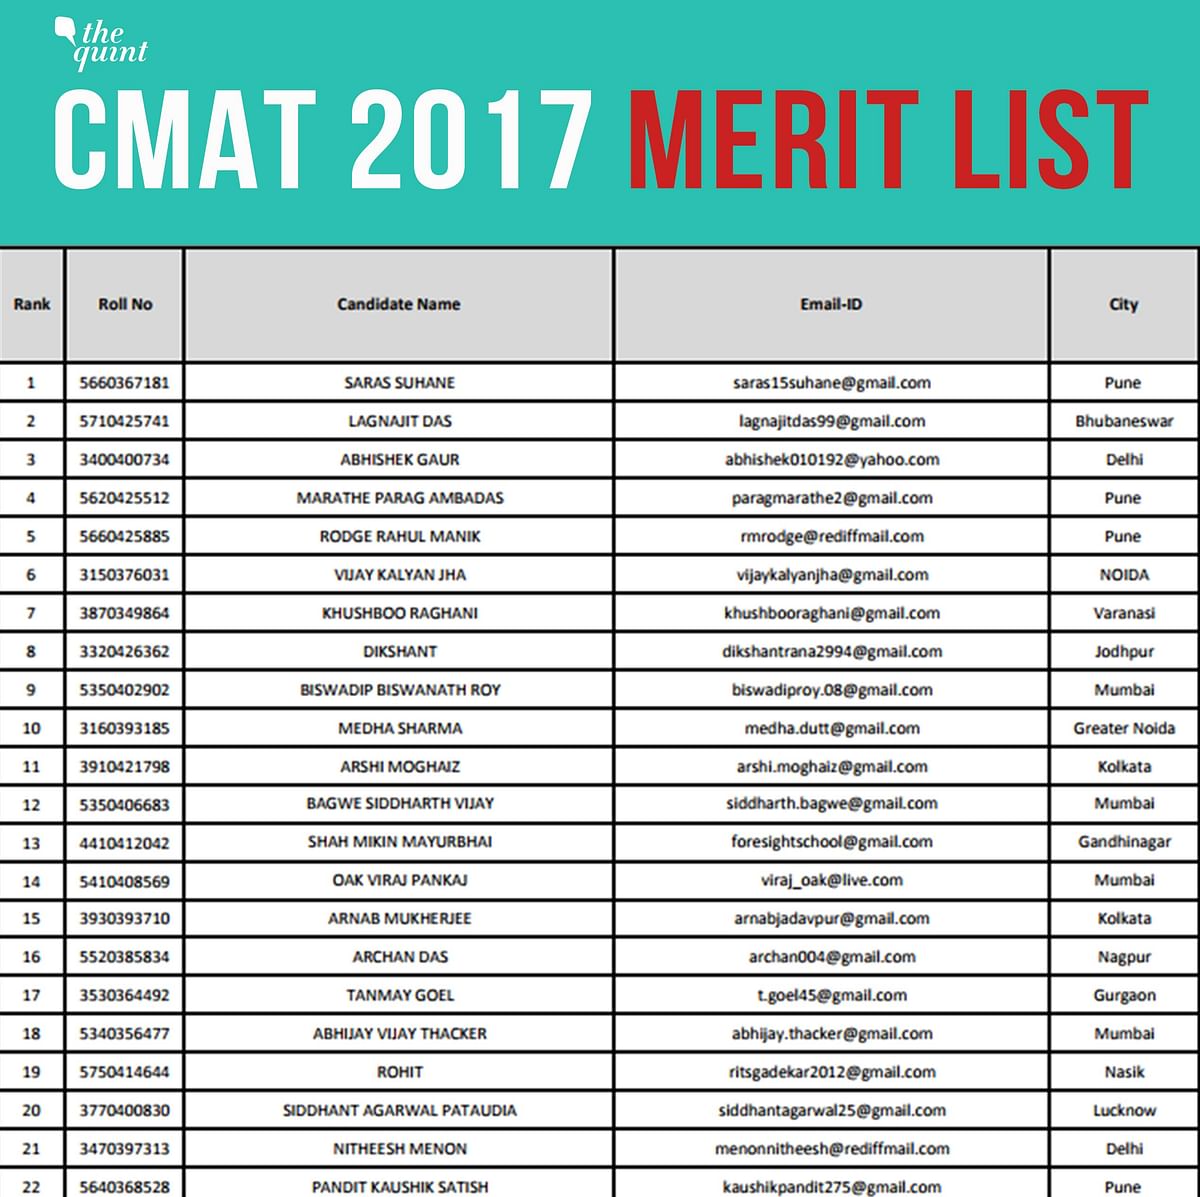 17 out of 24 candidates in the top 20 list in CMAT merit list belong to one centre – is this merely a coincidence?